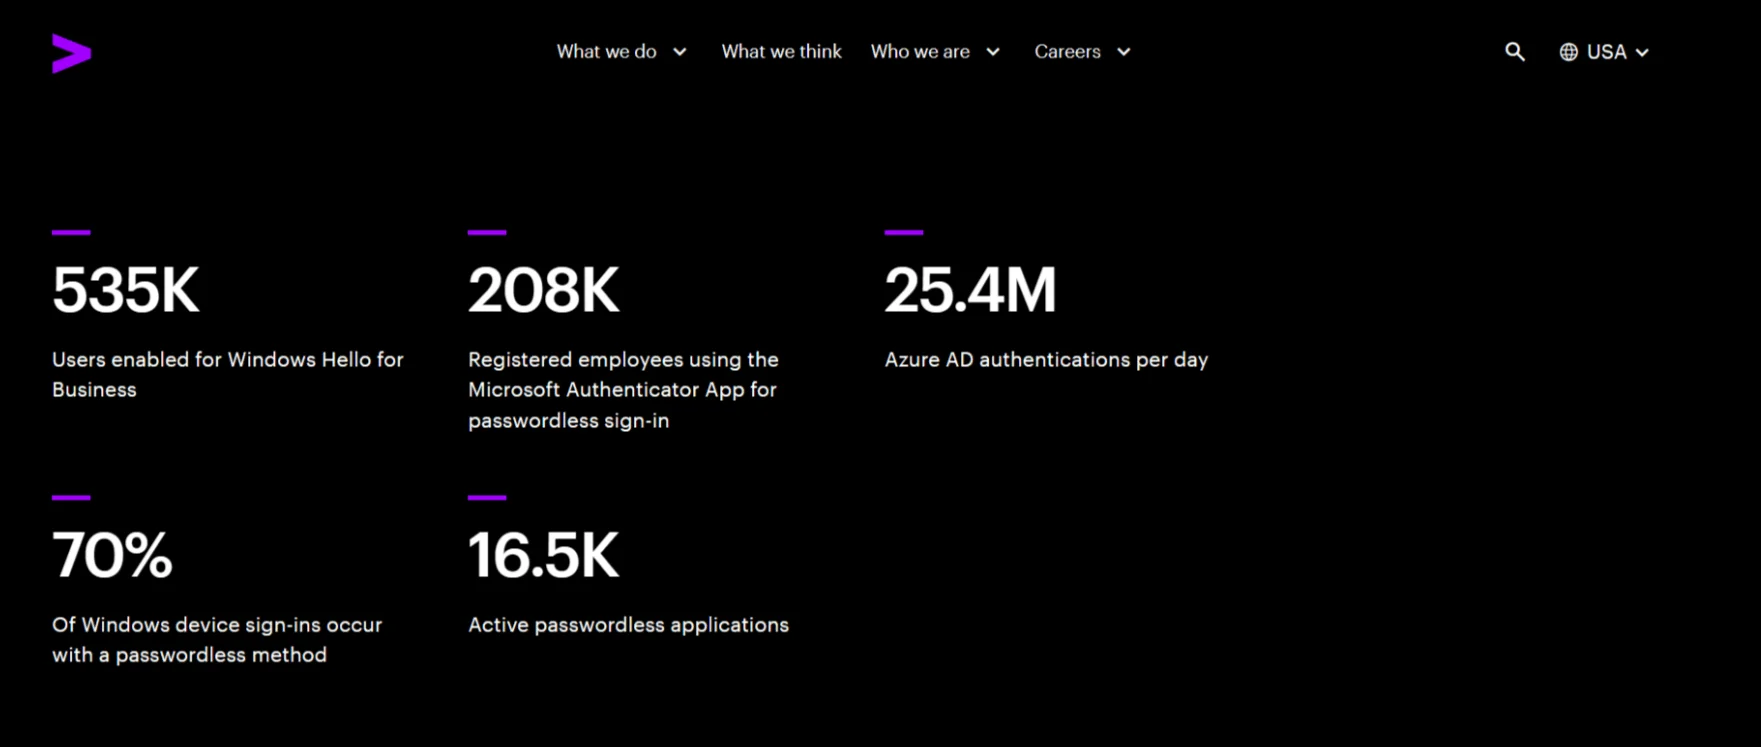 Accenture statistics for passwordless related authentications (Source: Accenture)